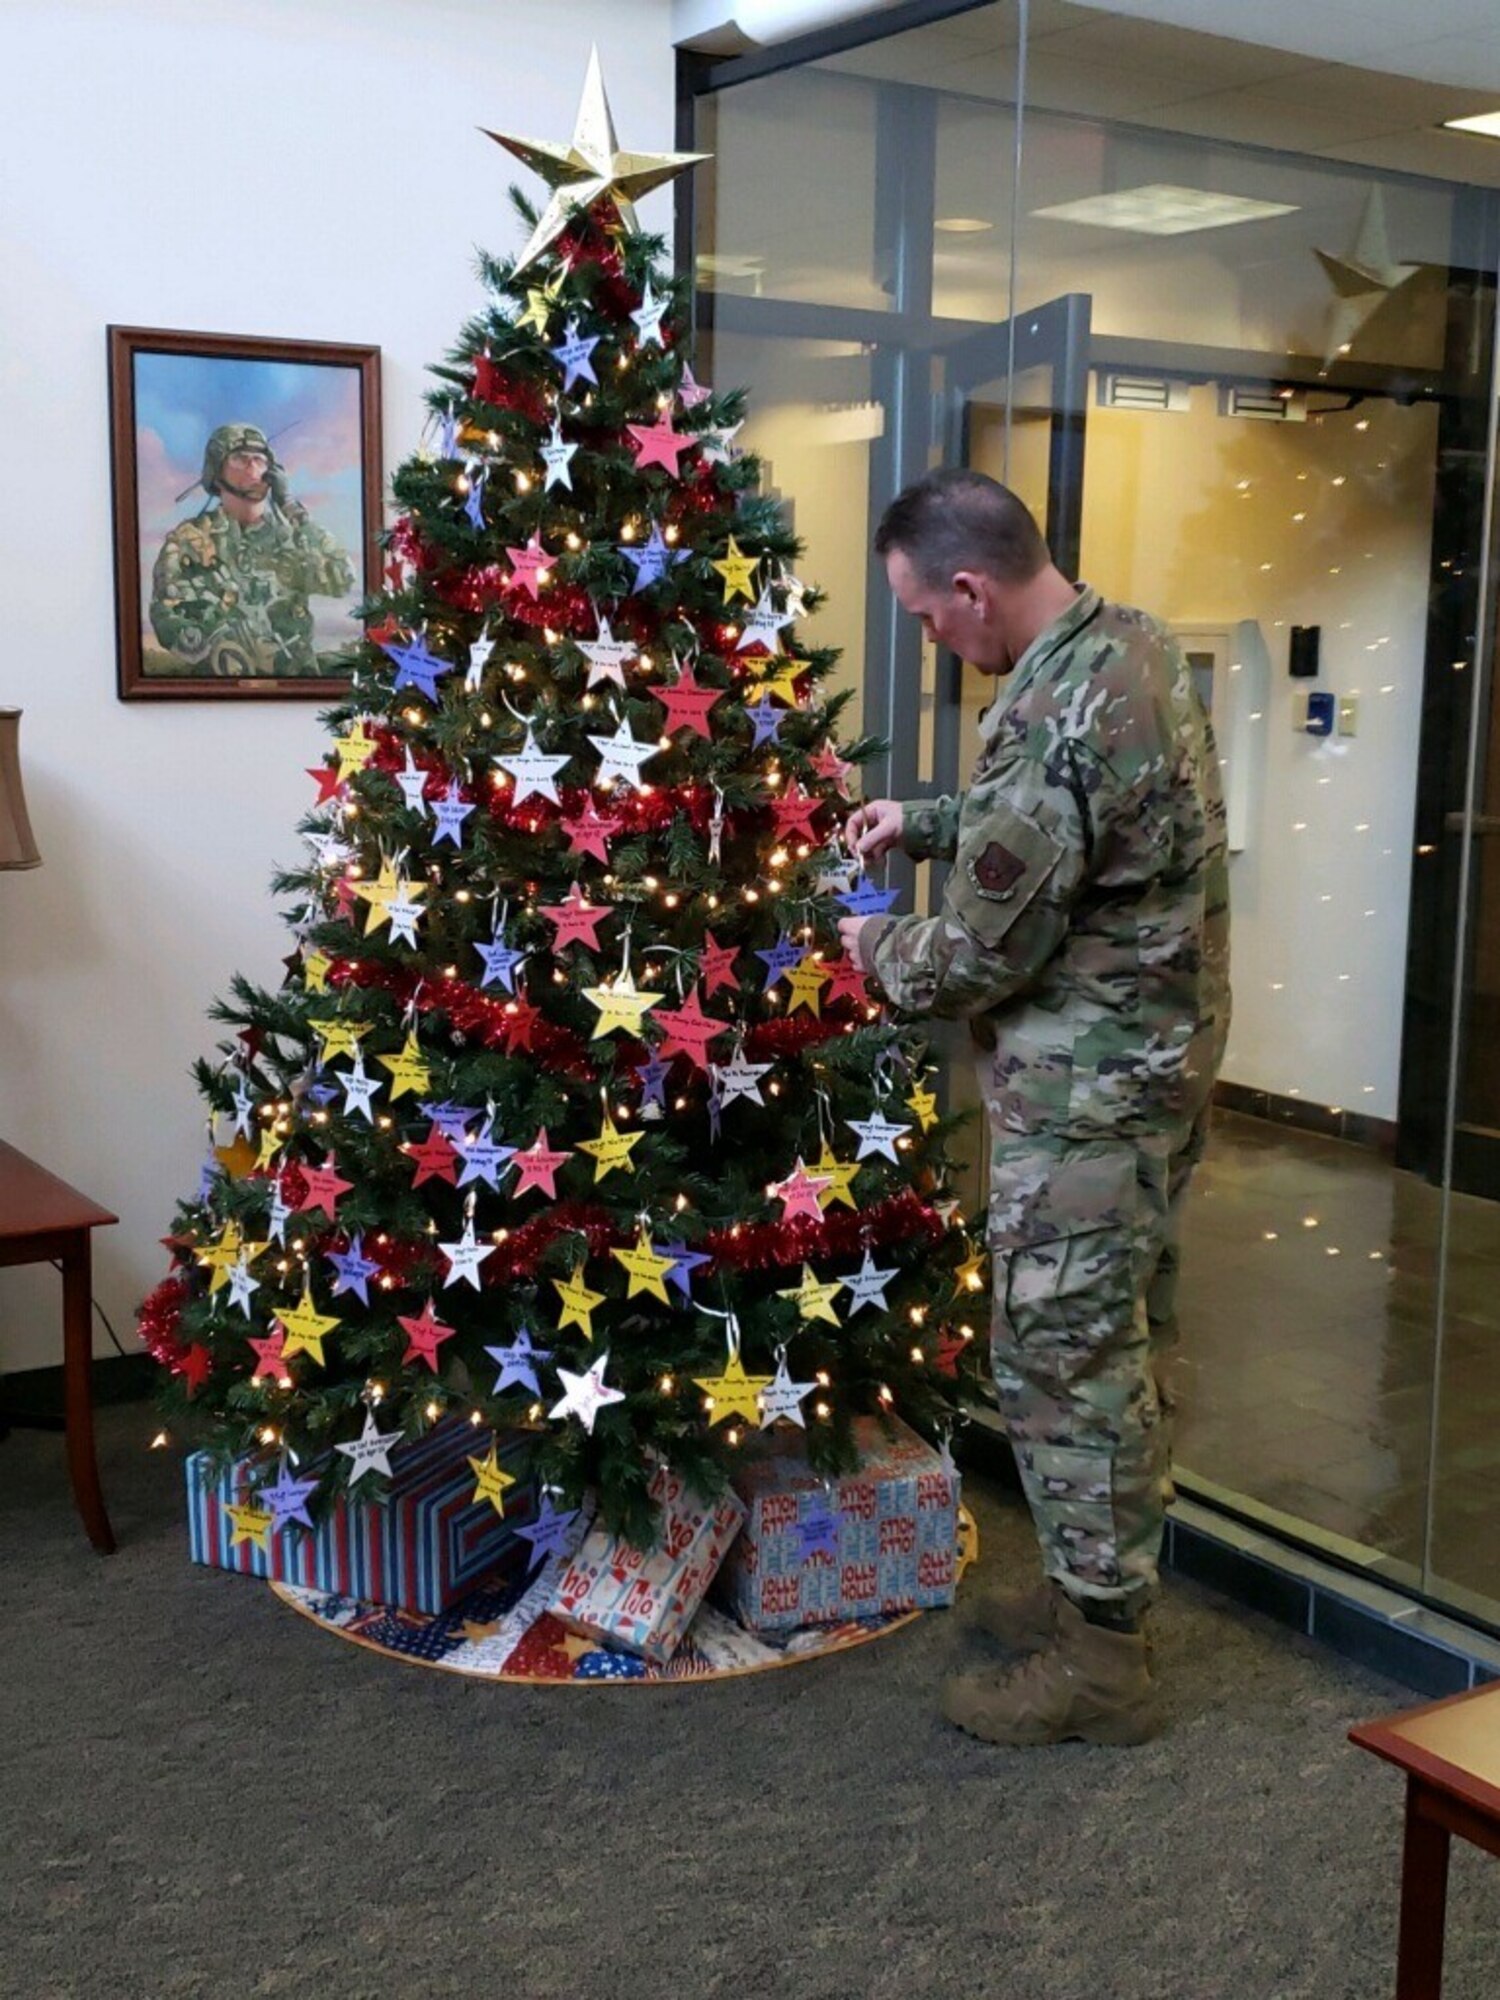 One person standing, placing a star on a Christmas tree.